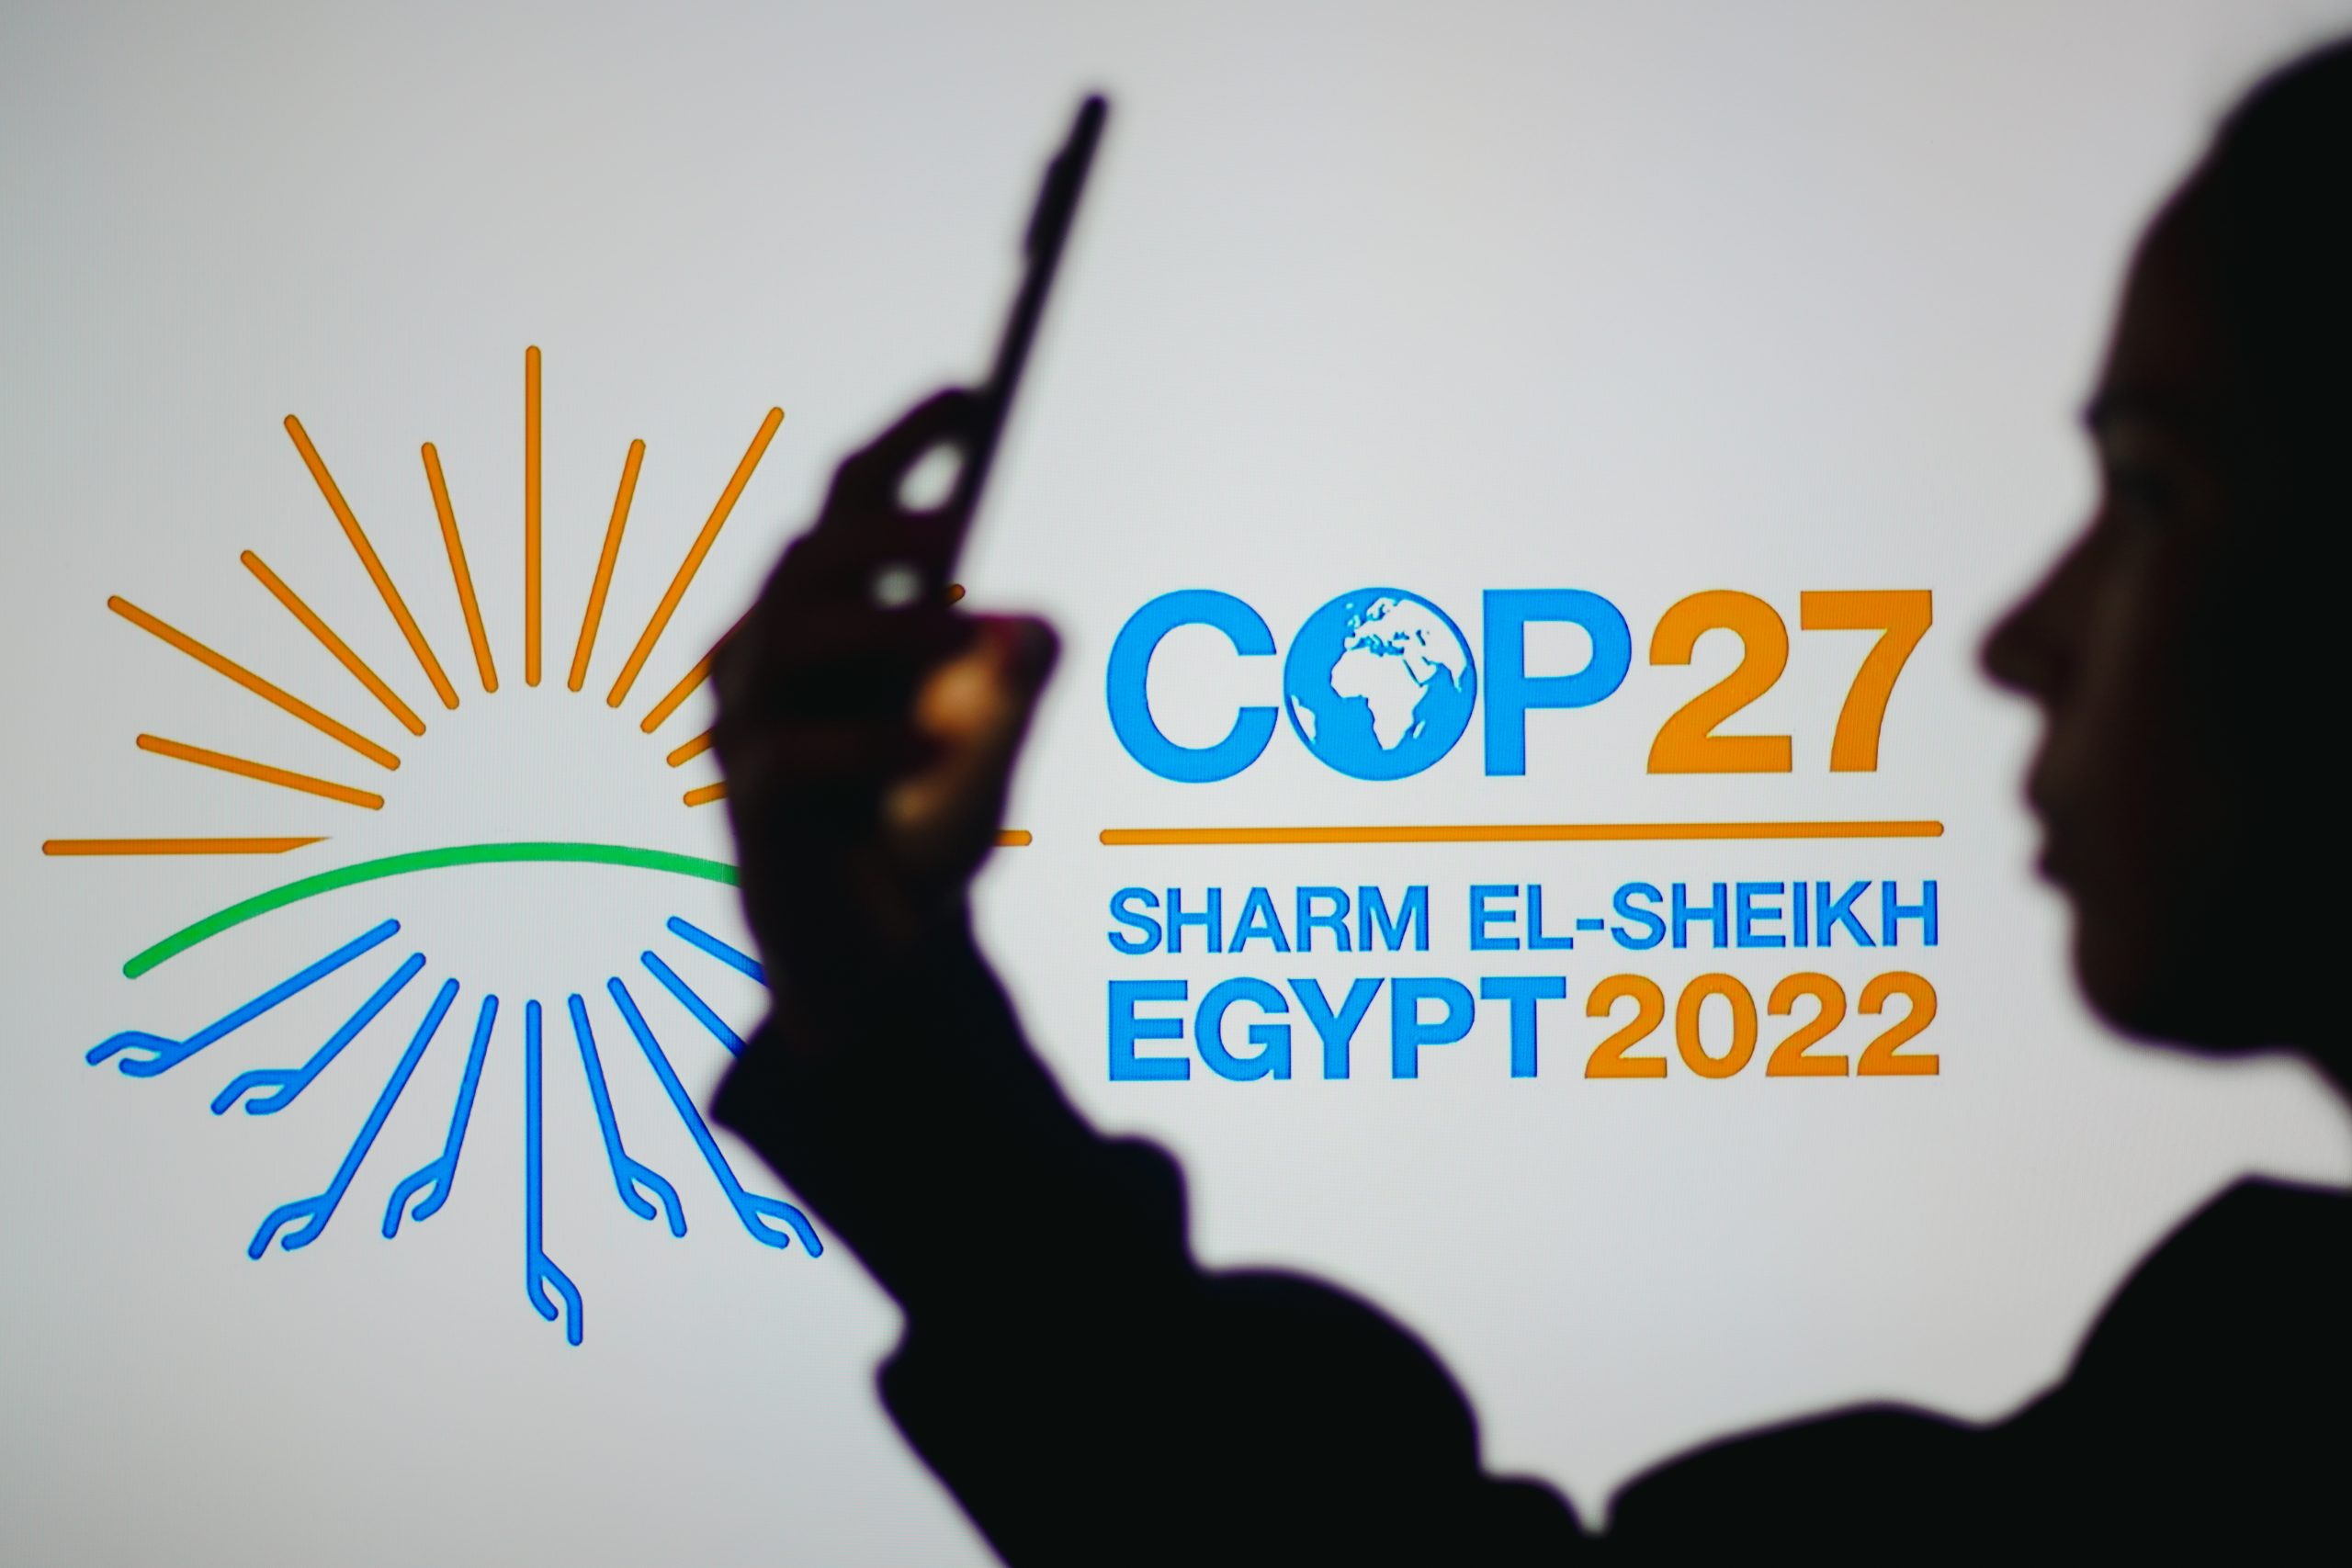 Israeli PM Lapid won't attend COP27 in Egypt after losing elections | Amwal Al Ghad